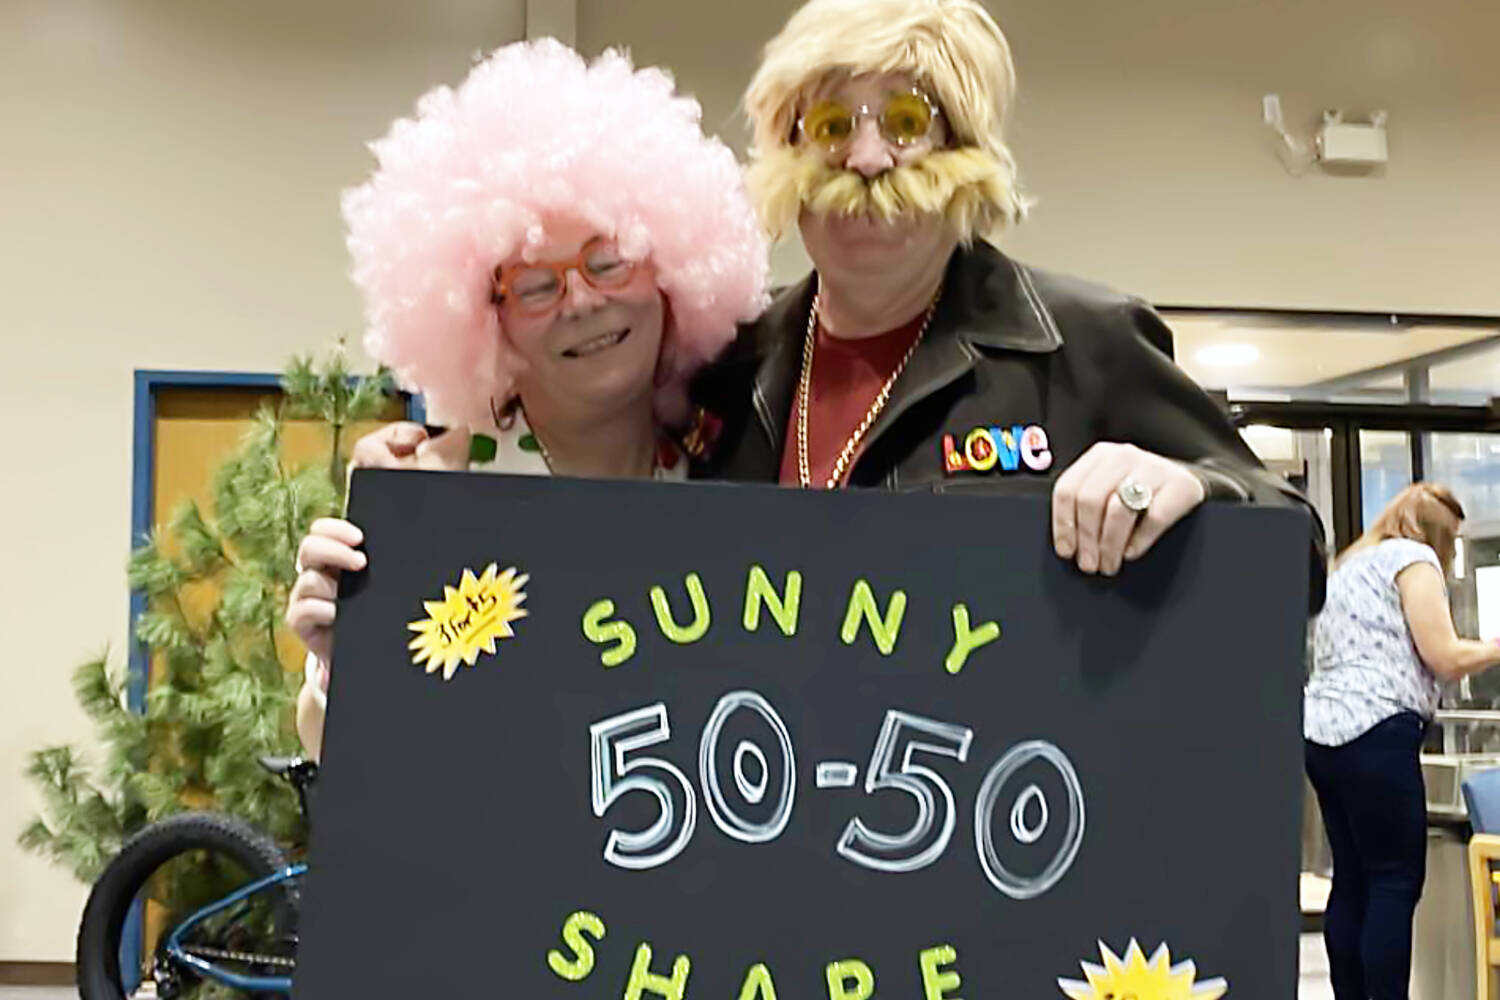 City of Salmon Arm Couns. Louise Wallace Richmond and Kevin Flynn lend a hand with the Shuswap Trail Alliance’s fundraising efforts during the Trails Party at the SASCU Recreation Centre on Friday, Feb. 3, 2023. (Barb Brouwer/Facebook photo)